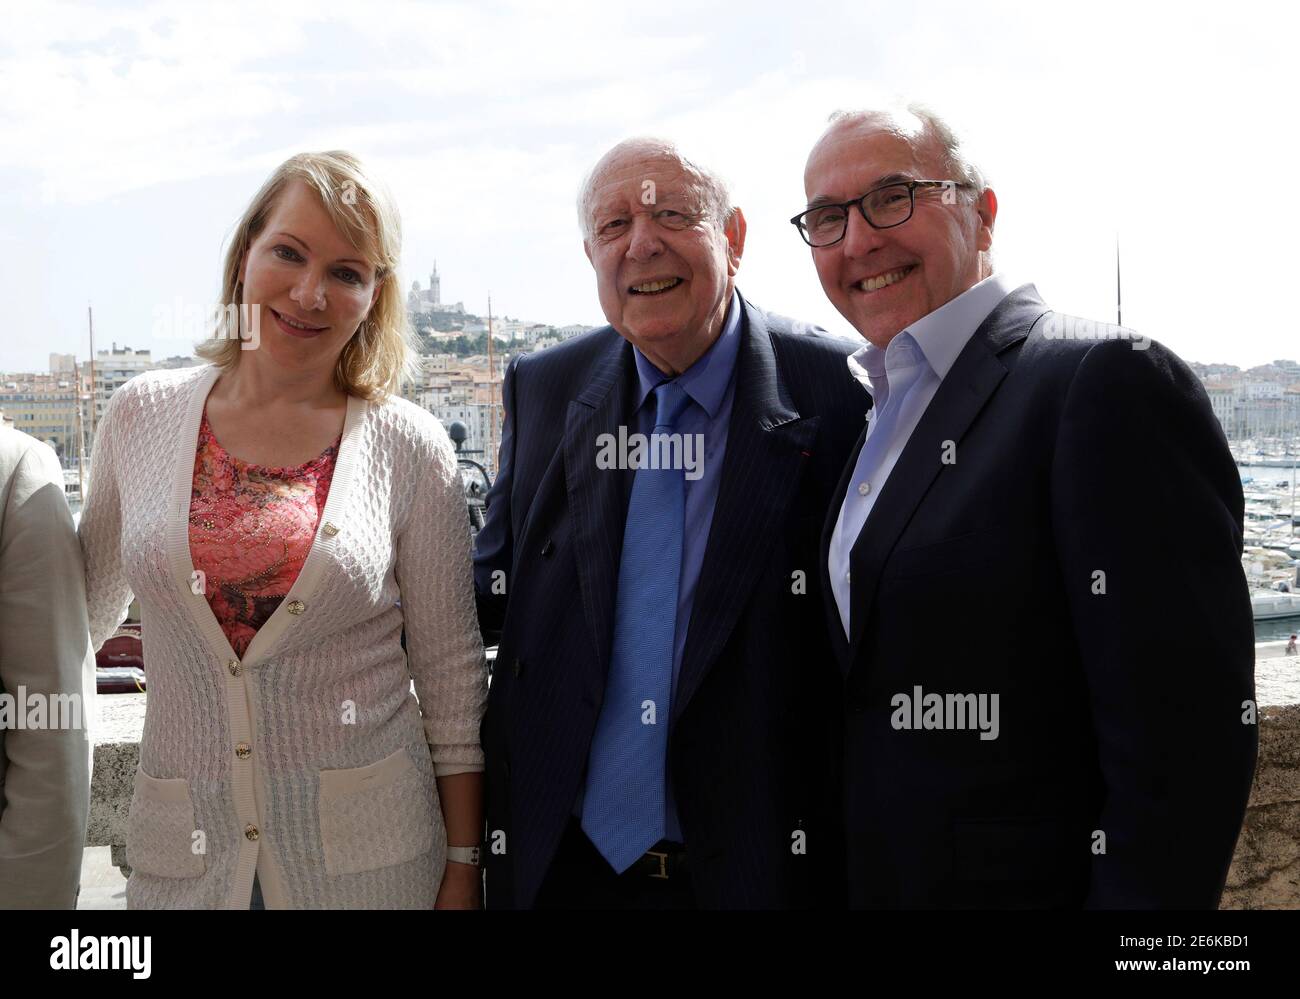 Marseille's mayor Jean-Claude Gaudin (C), Olympique de Marseille's majority  owner, billionaire businesswoman Margarita Louis-Dreyfus (L) and Frank  McCourt, former owner of the Los Angeles Dodgers baseball team, pose after  they attend a